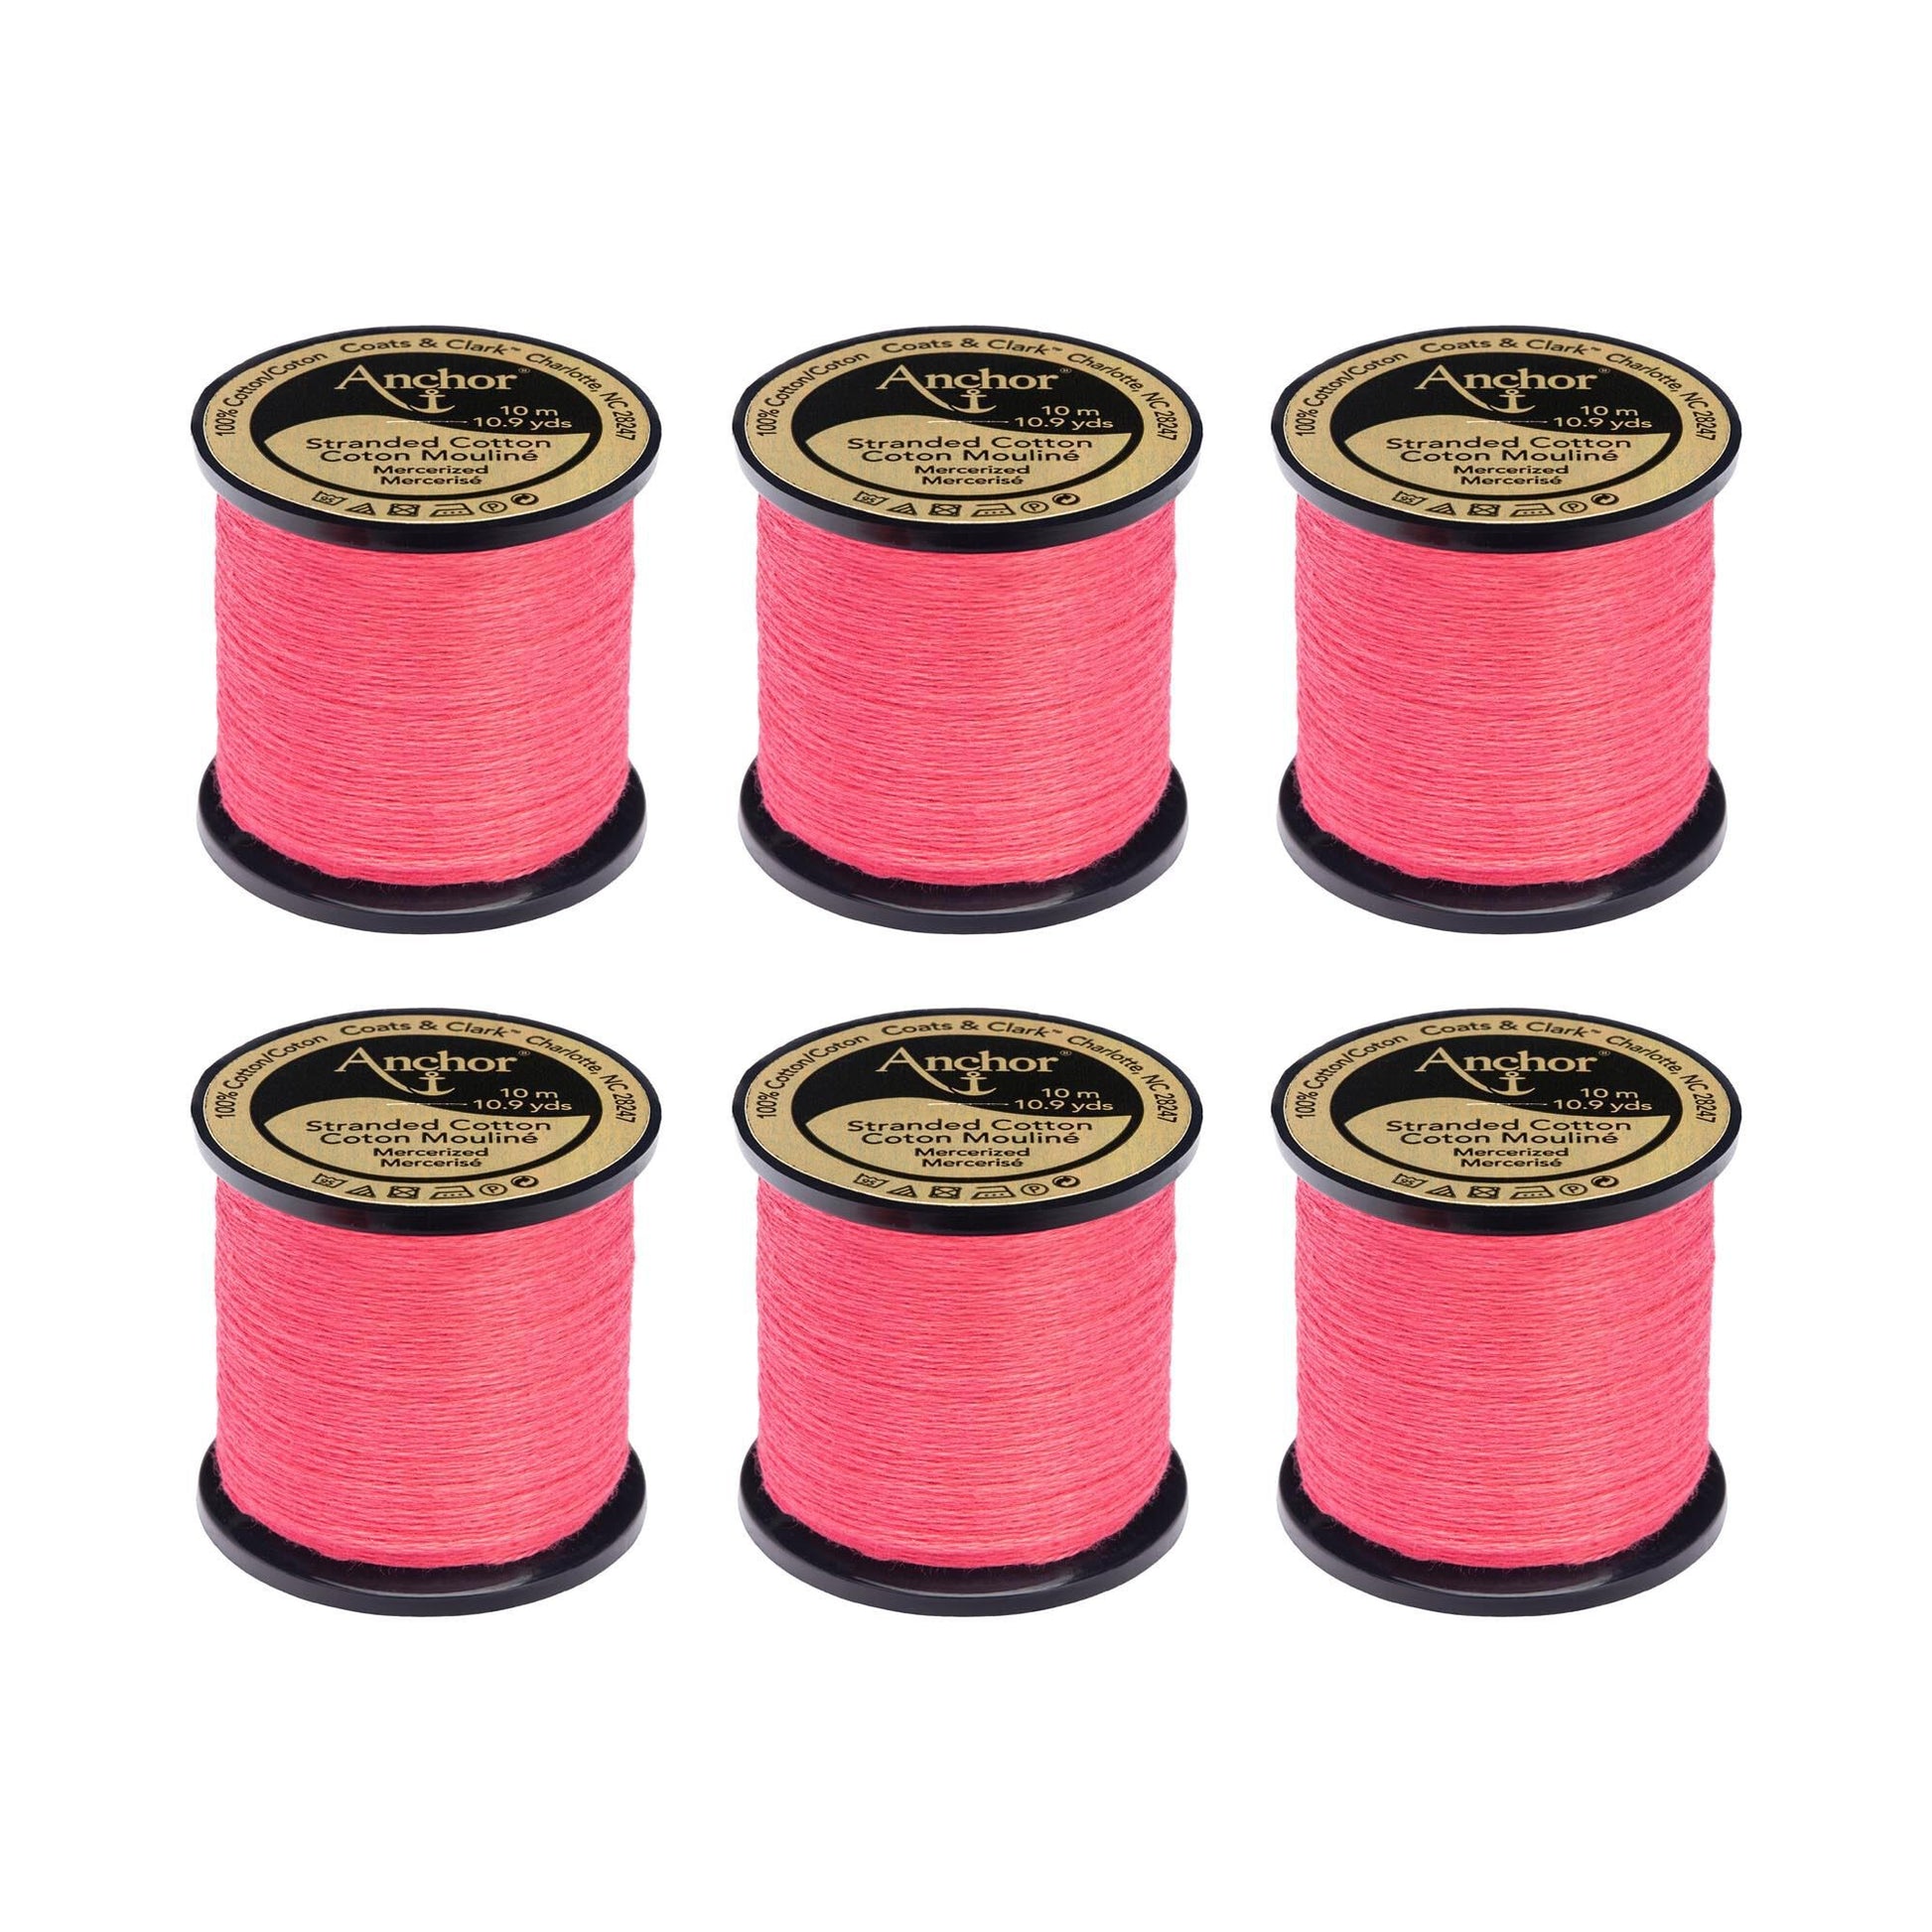 Anchor Spooled Floss 10 Meters (6 Pack) 0038 Blossom Pink Medium